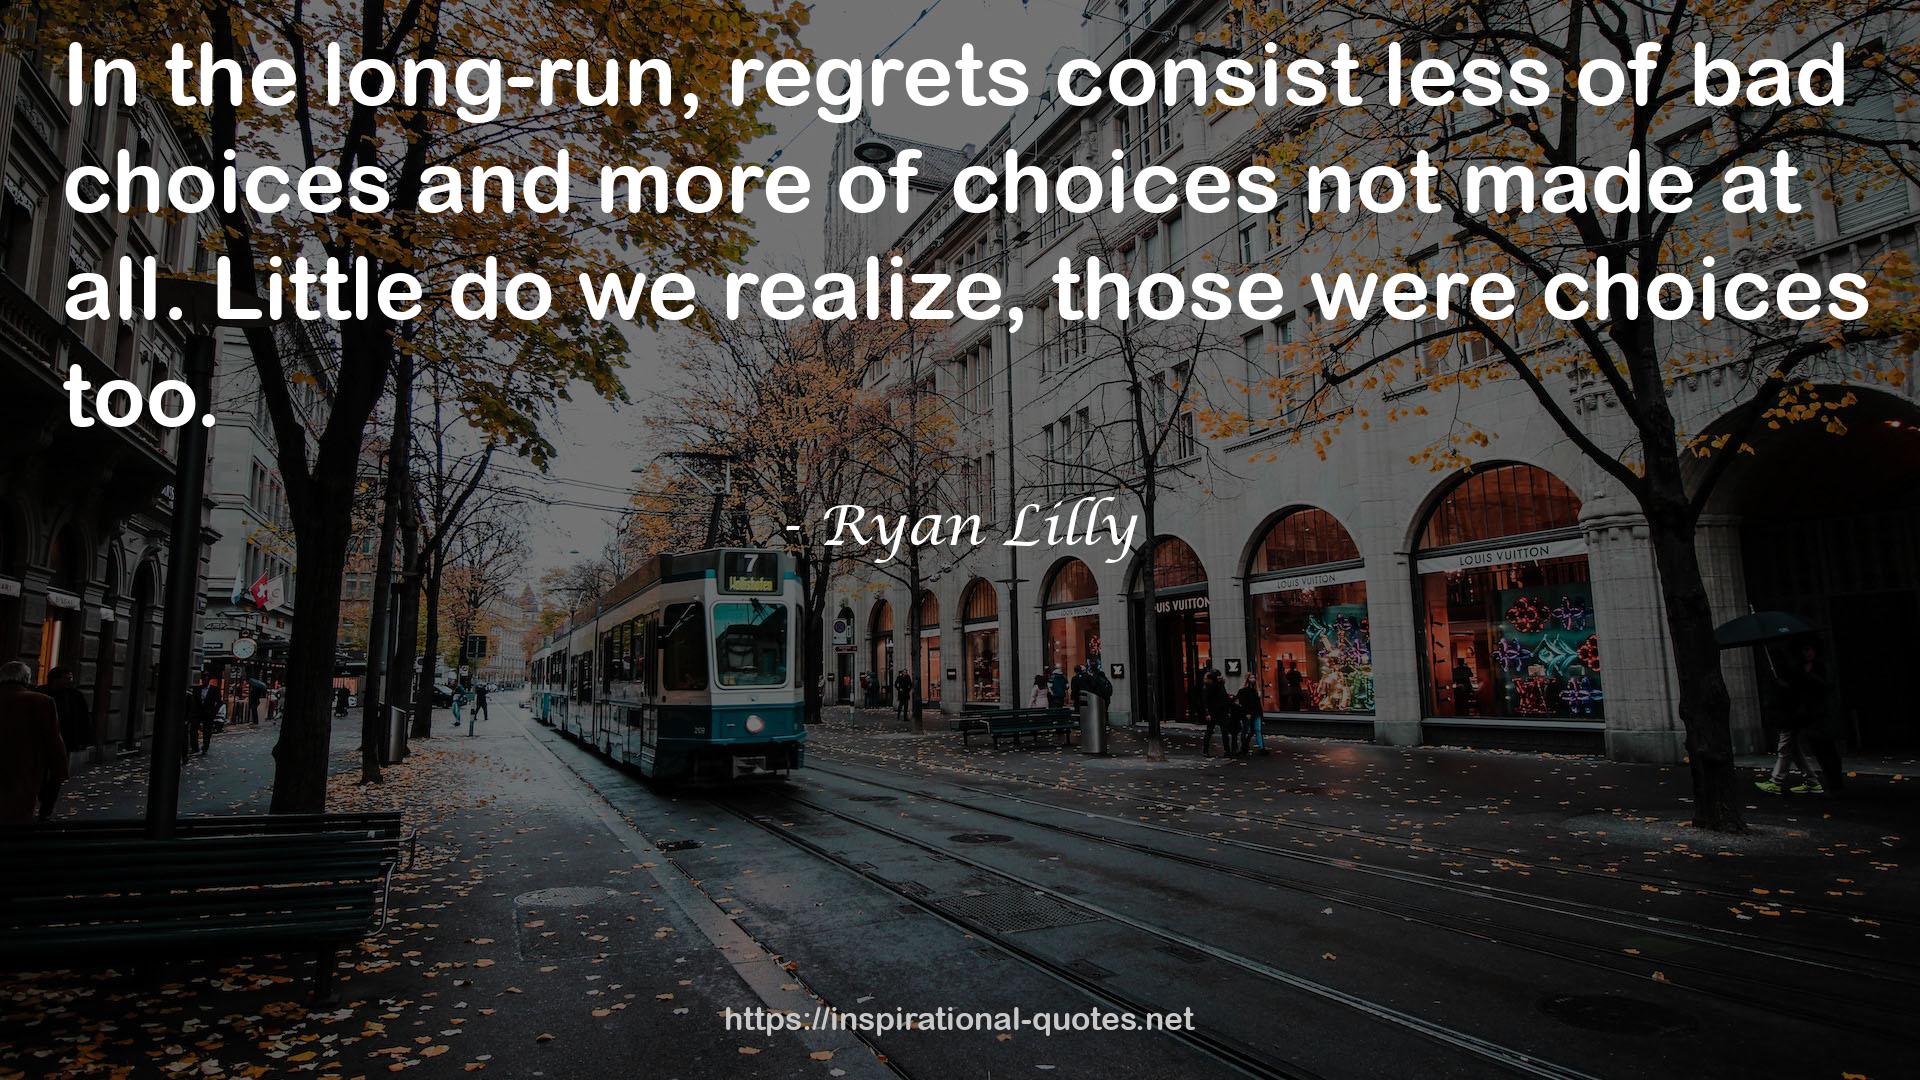 Ryan Lilly QUOTES